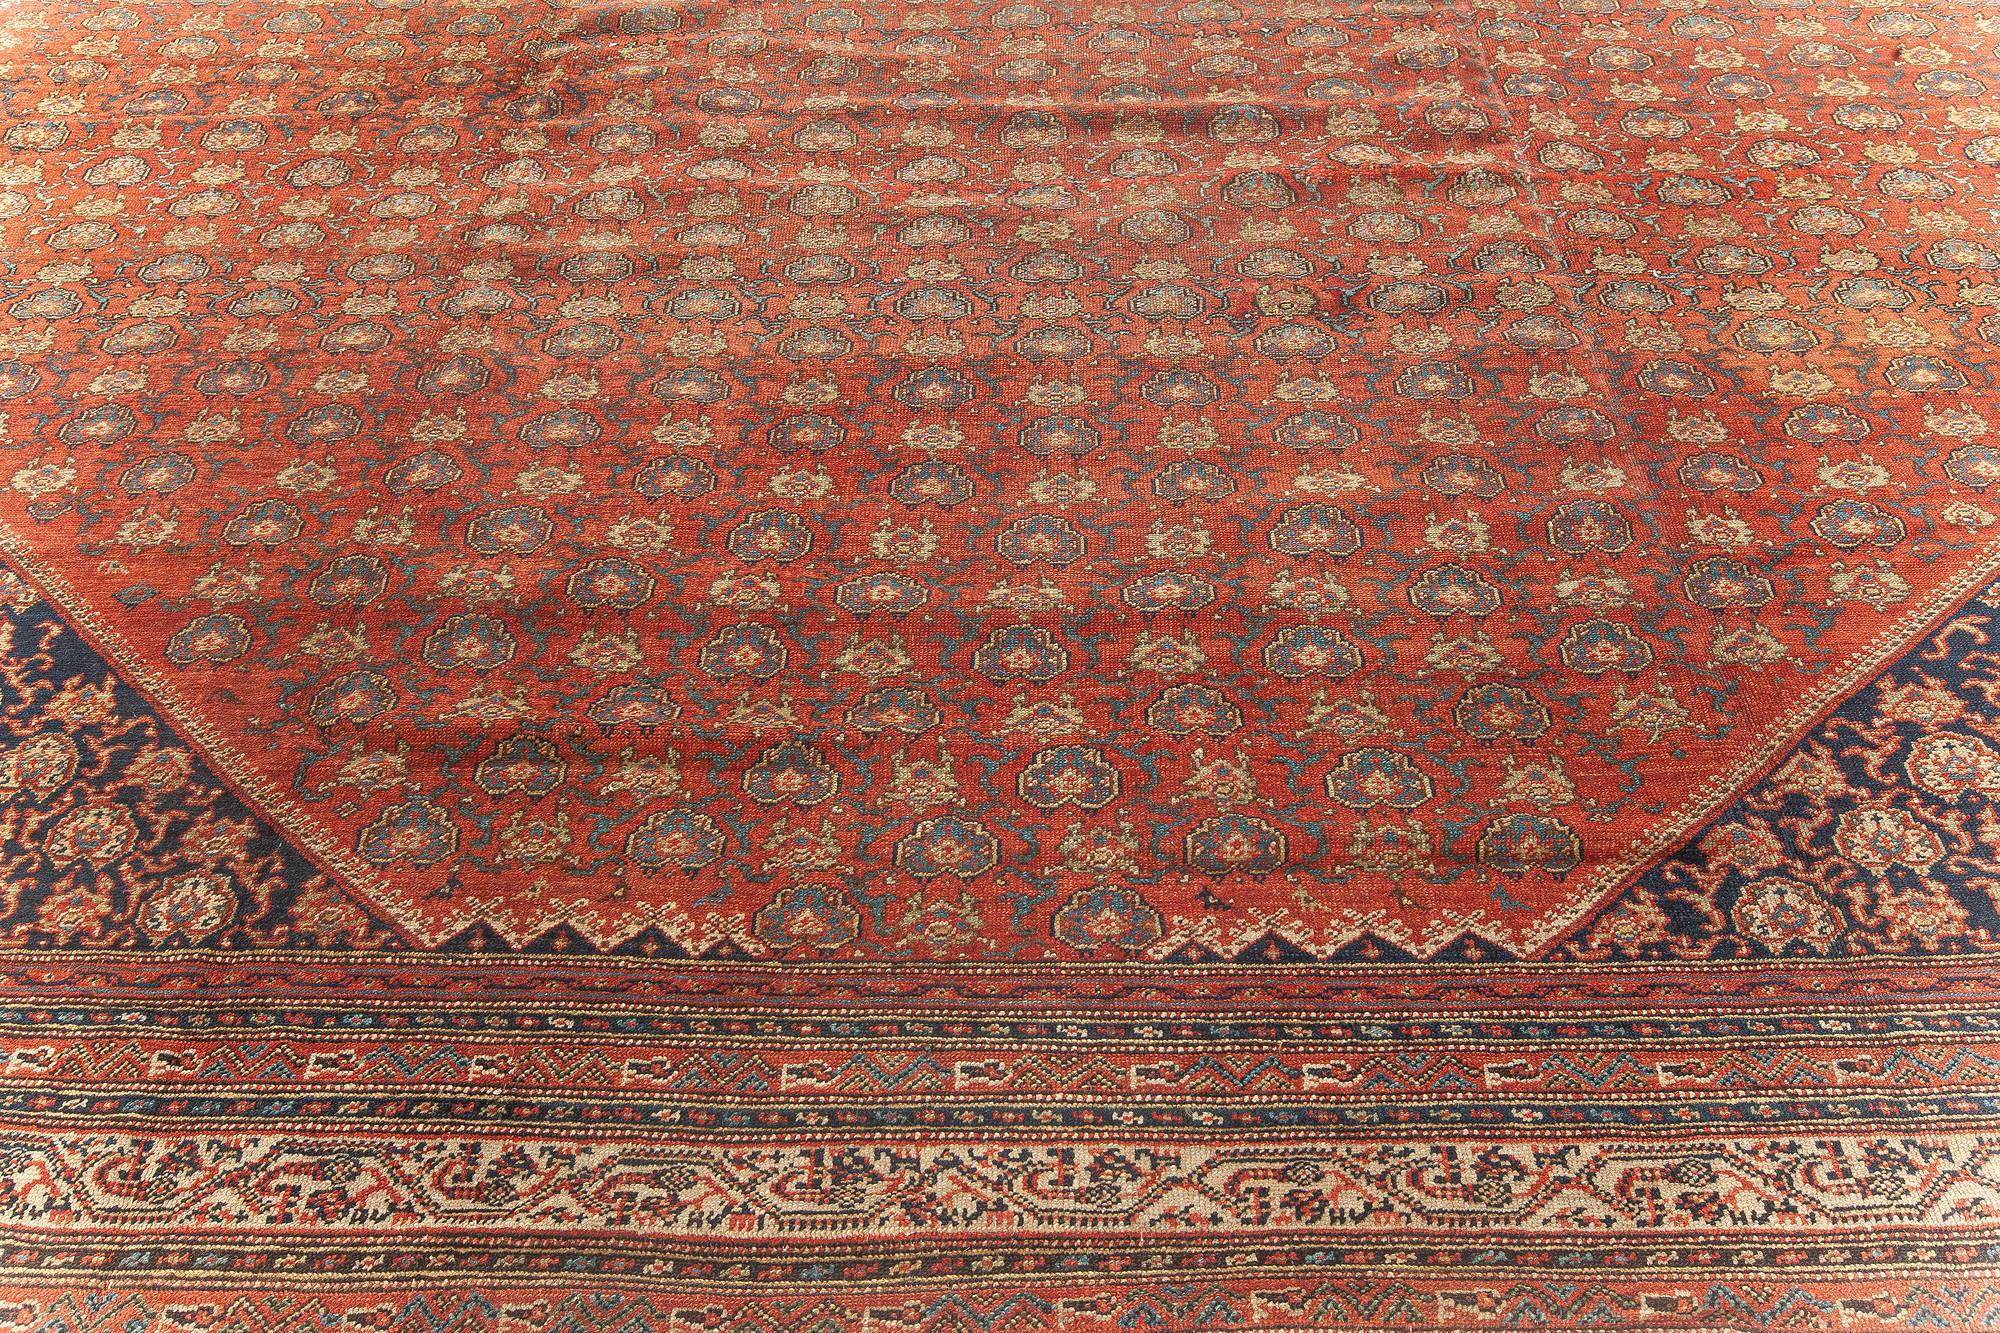 Early 20th Century Persian Malayer Red Wool Rug In Good Condition For Sale In New York, NY